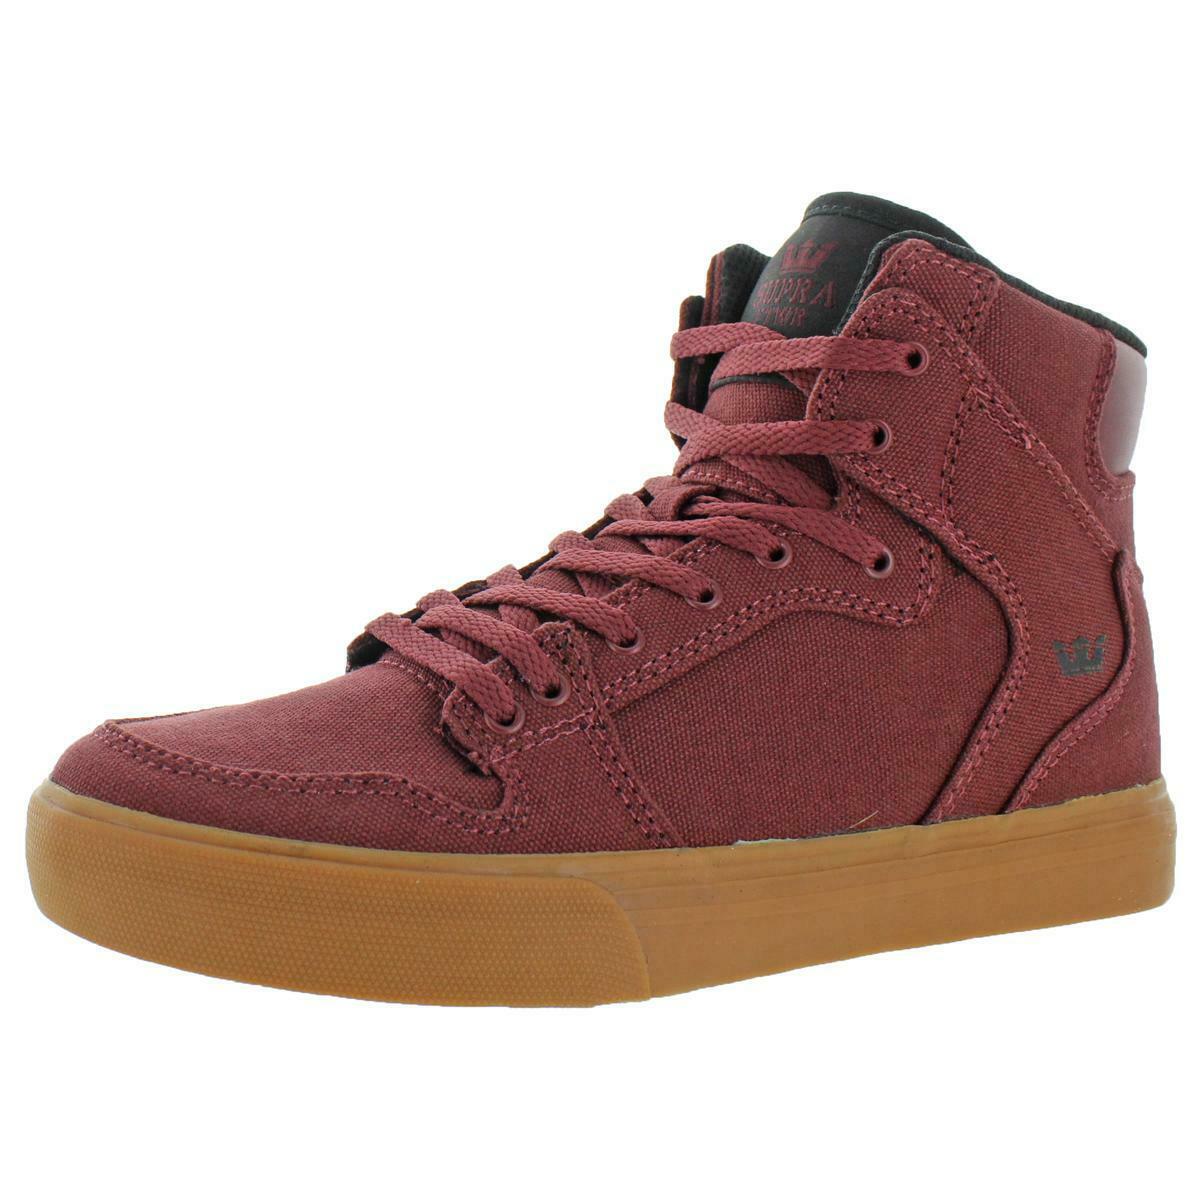 Supra Boys Vaider Canvas High Top Trainers Skate Shoes Sneakers Bhfo 6151